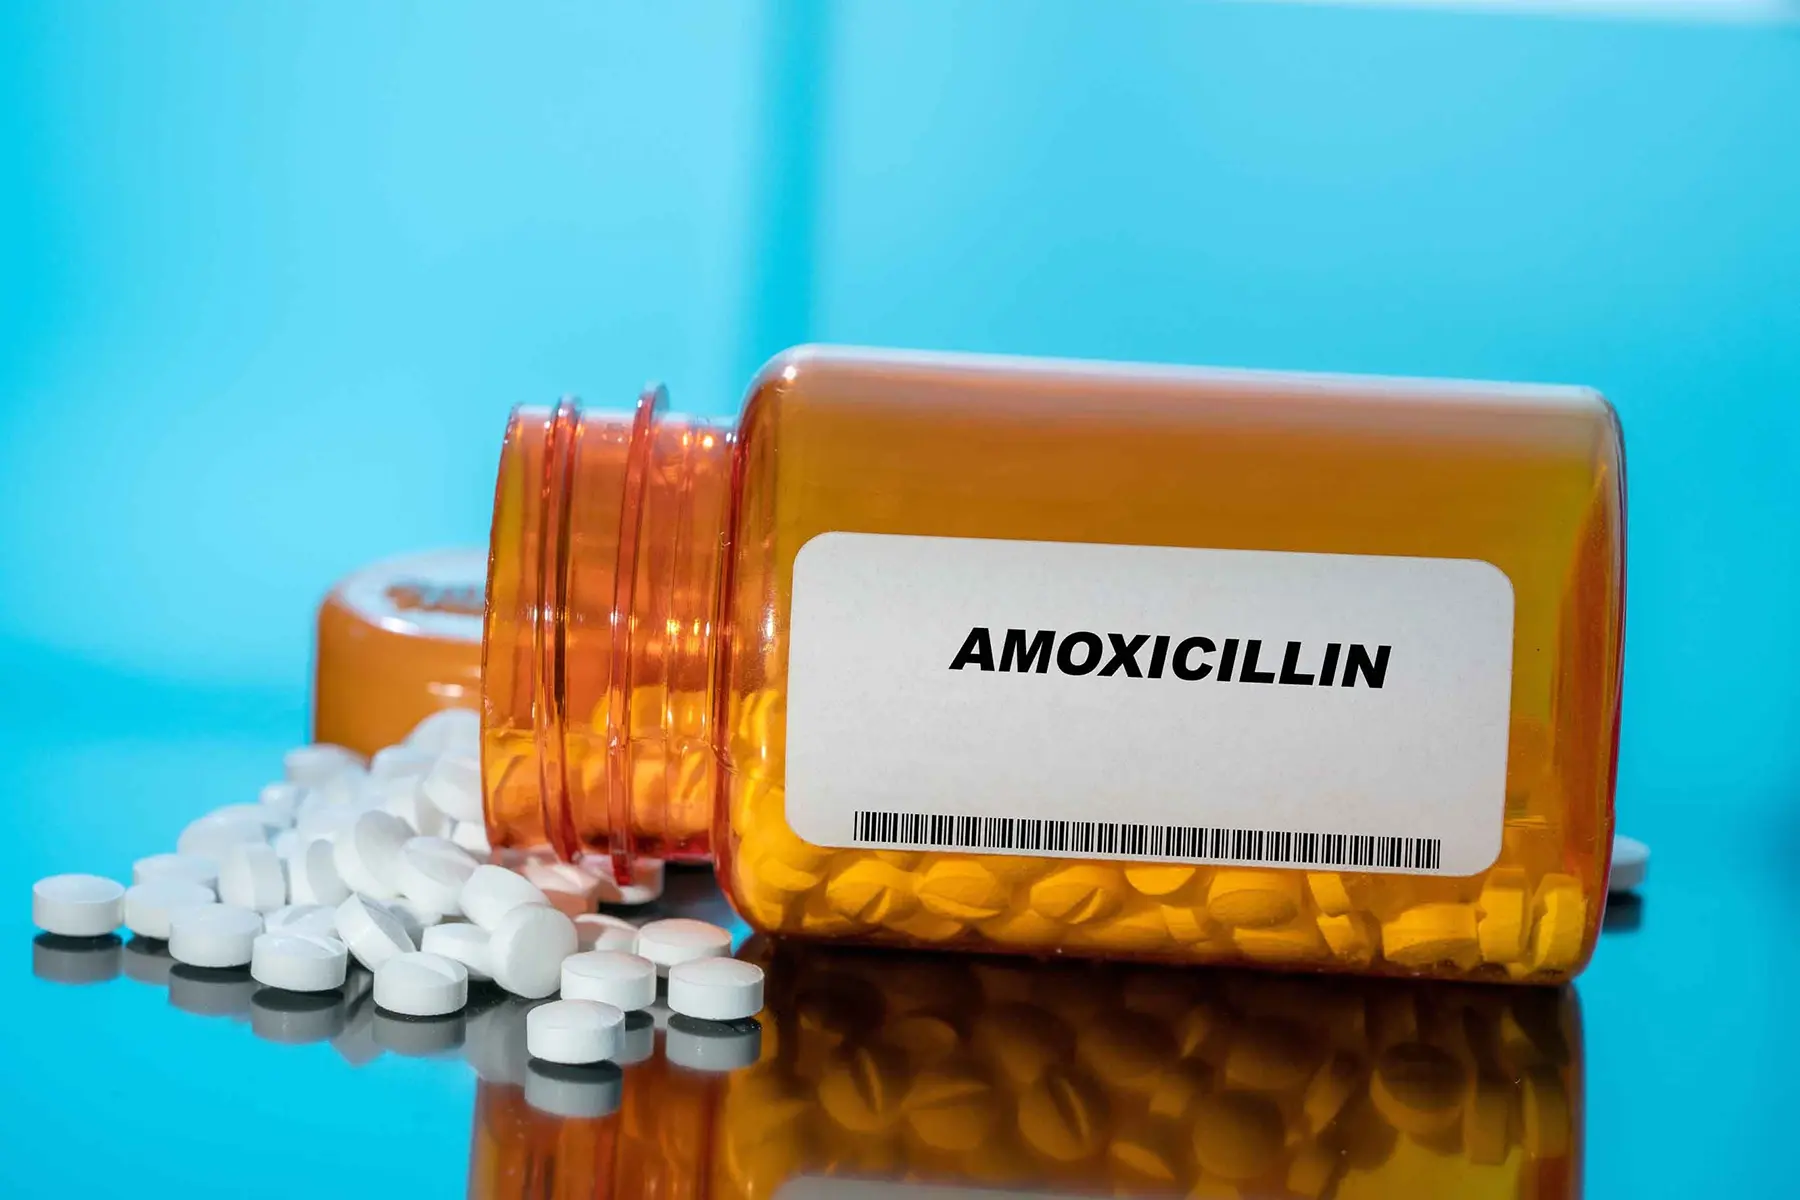 Amoxicillin pill bottle toppled over with pills spilling out.